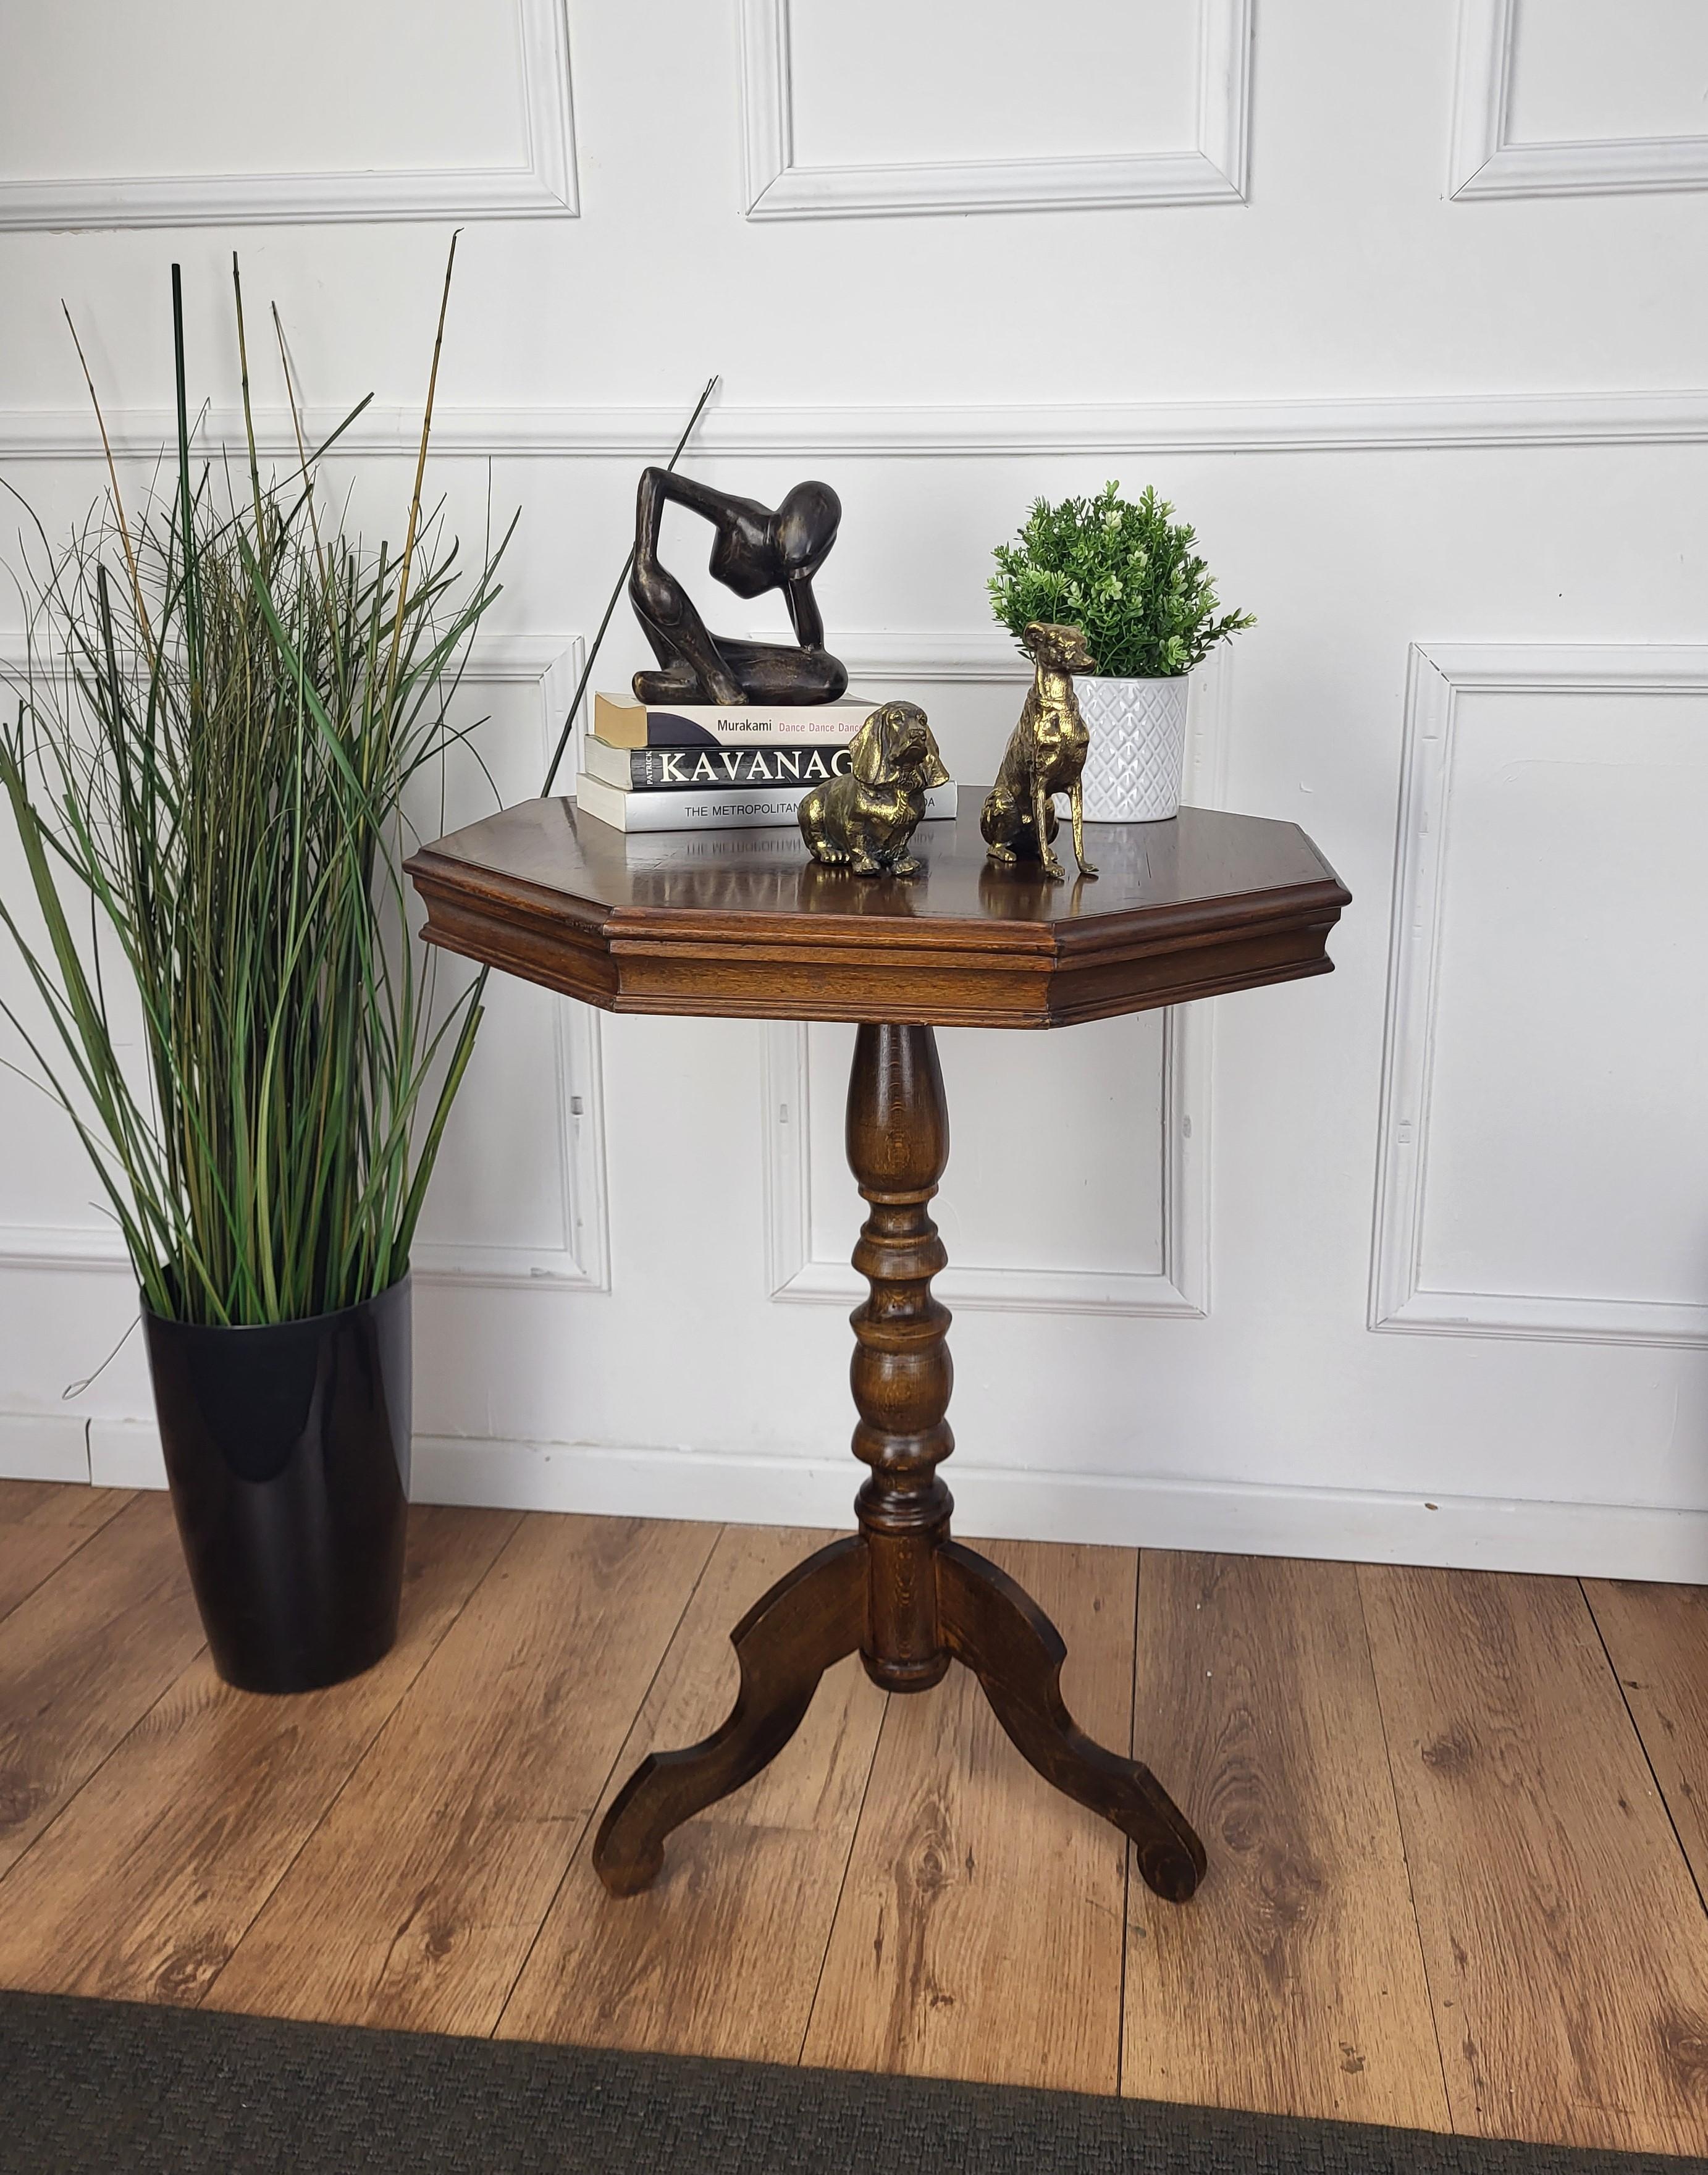 A beautiful Italian Walnut octagonal side table with great details and frames shaped in Victorian, Napoleon III, Louis XV style with chessboard on the top and the tripod feet legs. A very elegant, modern and classic piece that showcases the refined